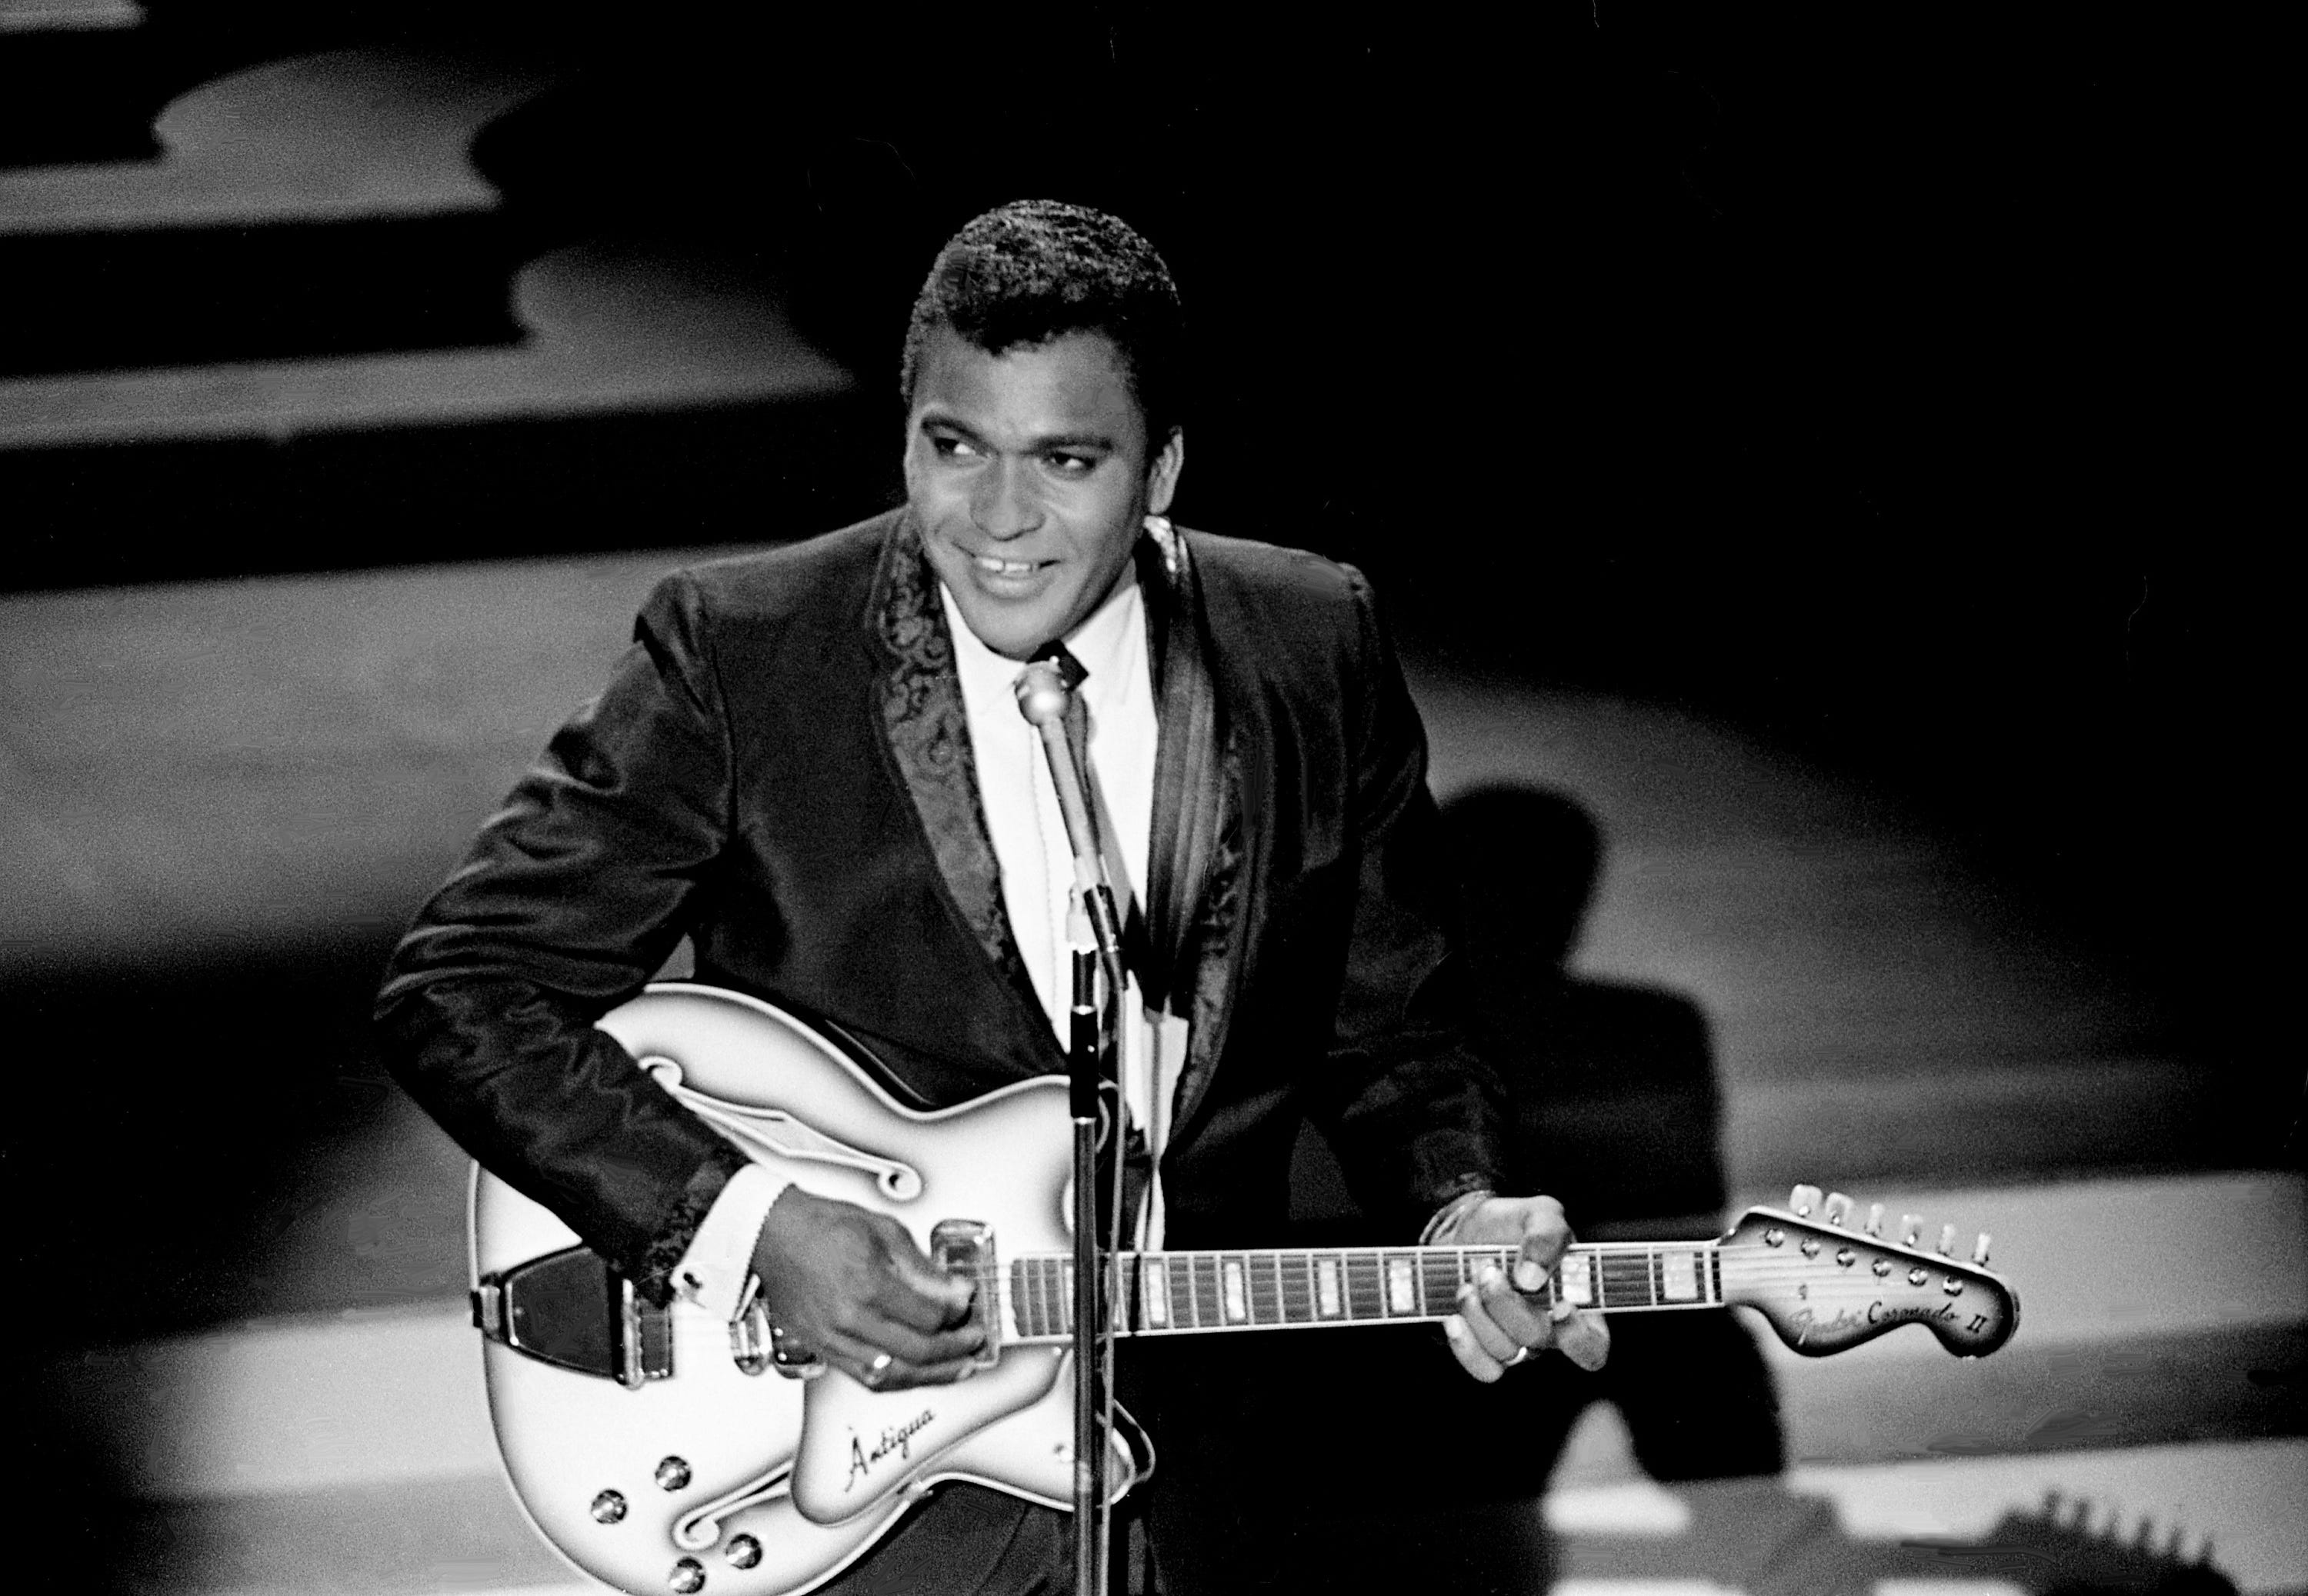 Charley Pride performs one of the five songs nominated for Single of the Year during the third annual CMA Awards show at the Ryman Auditorium on Oct. 15, 1969.